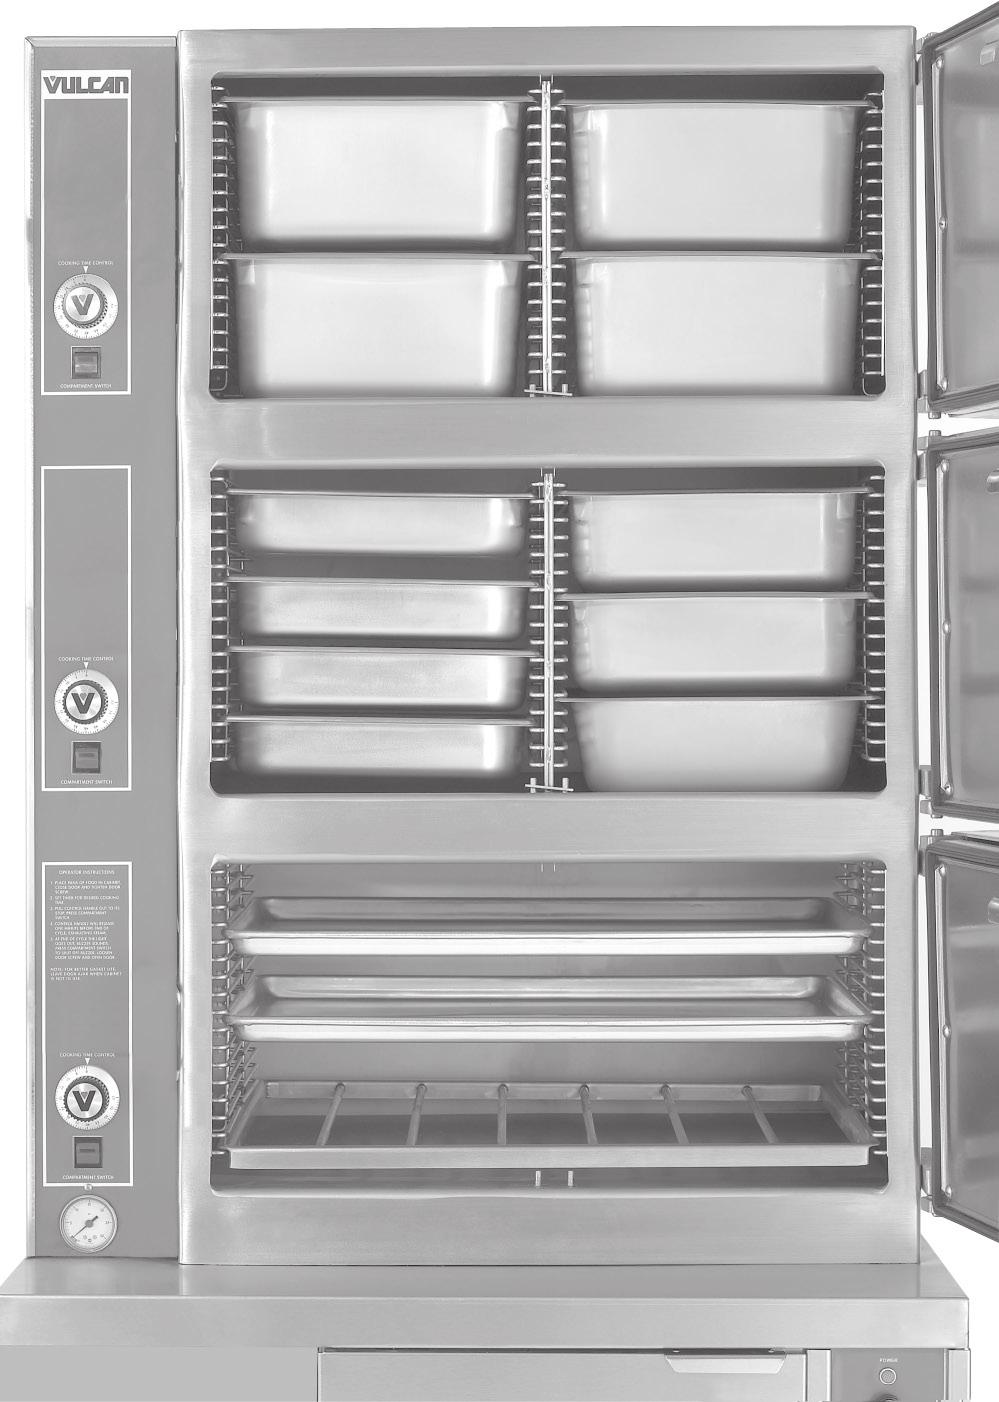 SELECTION OF PANS FOR STEAM COOKING IN VHL2 & VHL3 STEAMERS Vulcan Adapt-A-Pan TM steamer compartments (Fig. 12) are designed to accept combinations of the following perforated or solid cooking pans.